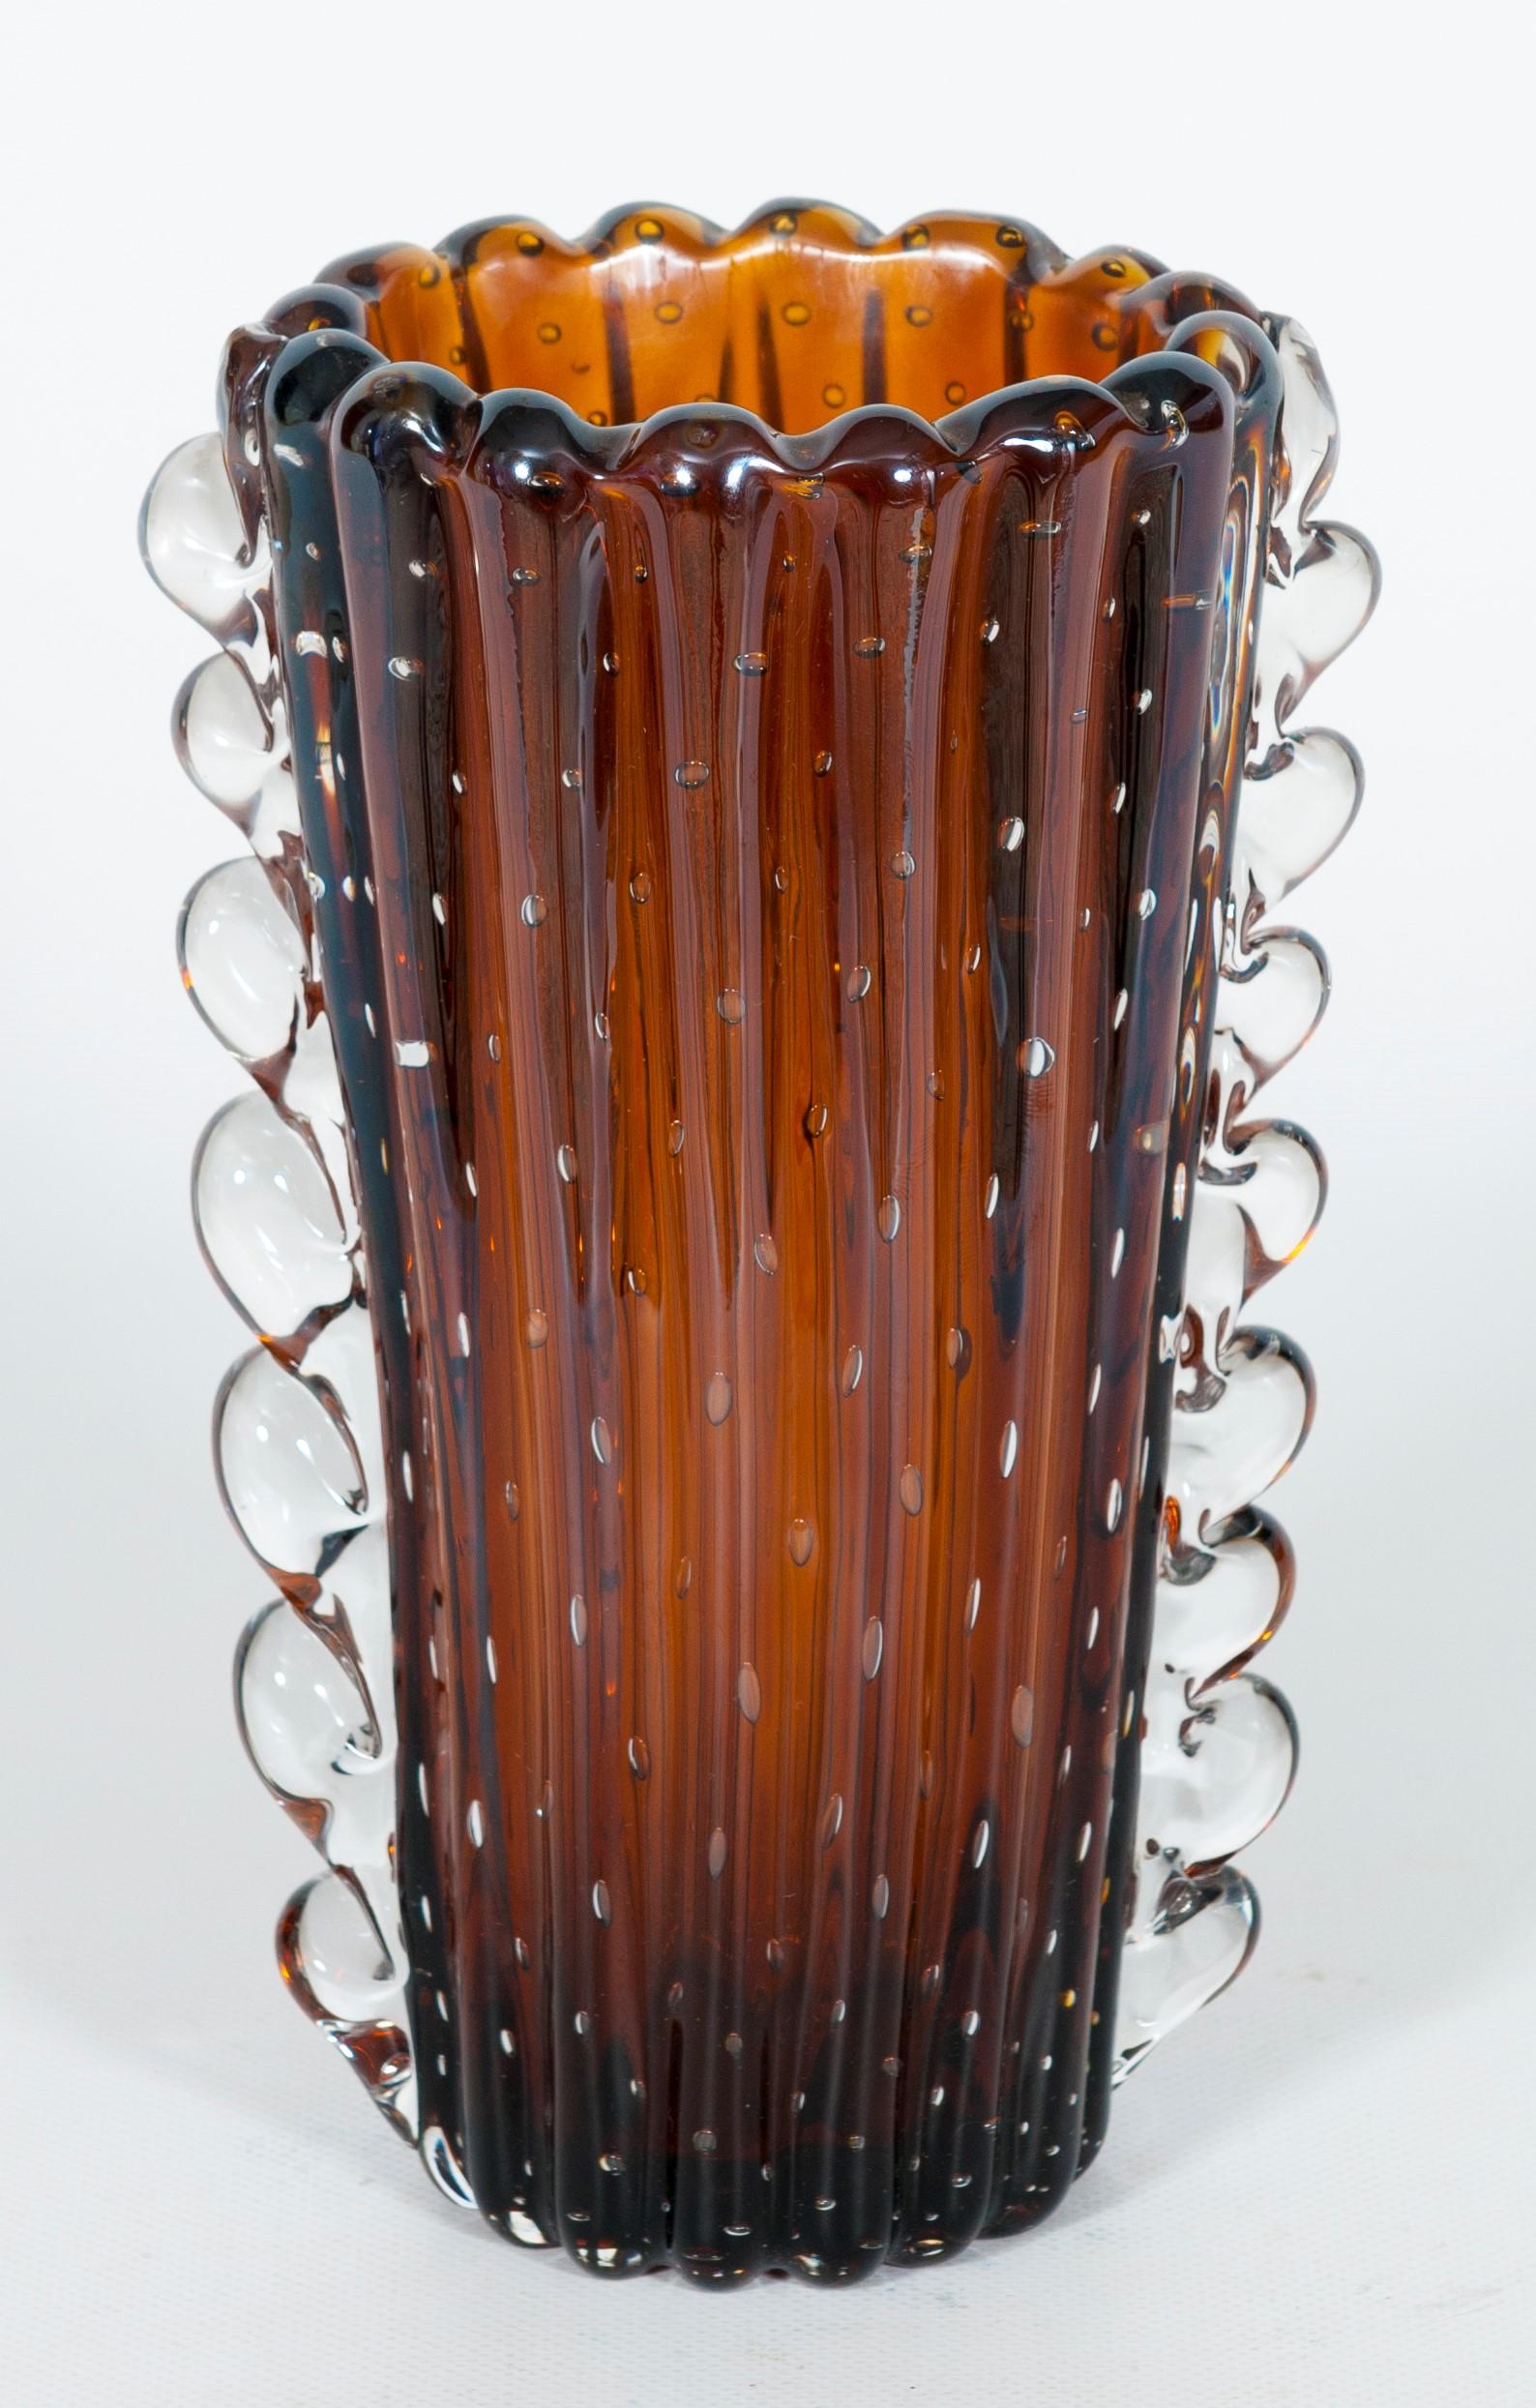 Dark-Amber Color Murano glass bubble vase with Morise Attributed to Seguso, 1980s, Italy.
This beautiful Venetian glass vase is made with blown dark-amber glass. The external surface is ribbed, decorated with vertical rounded stripes all around the